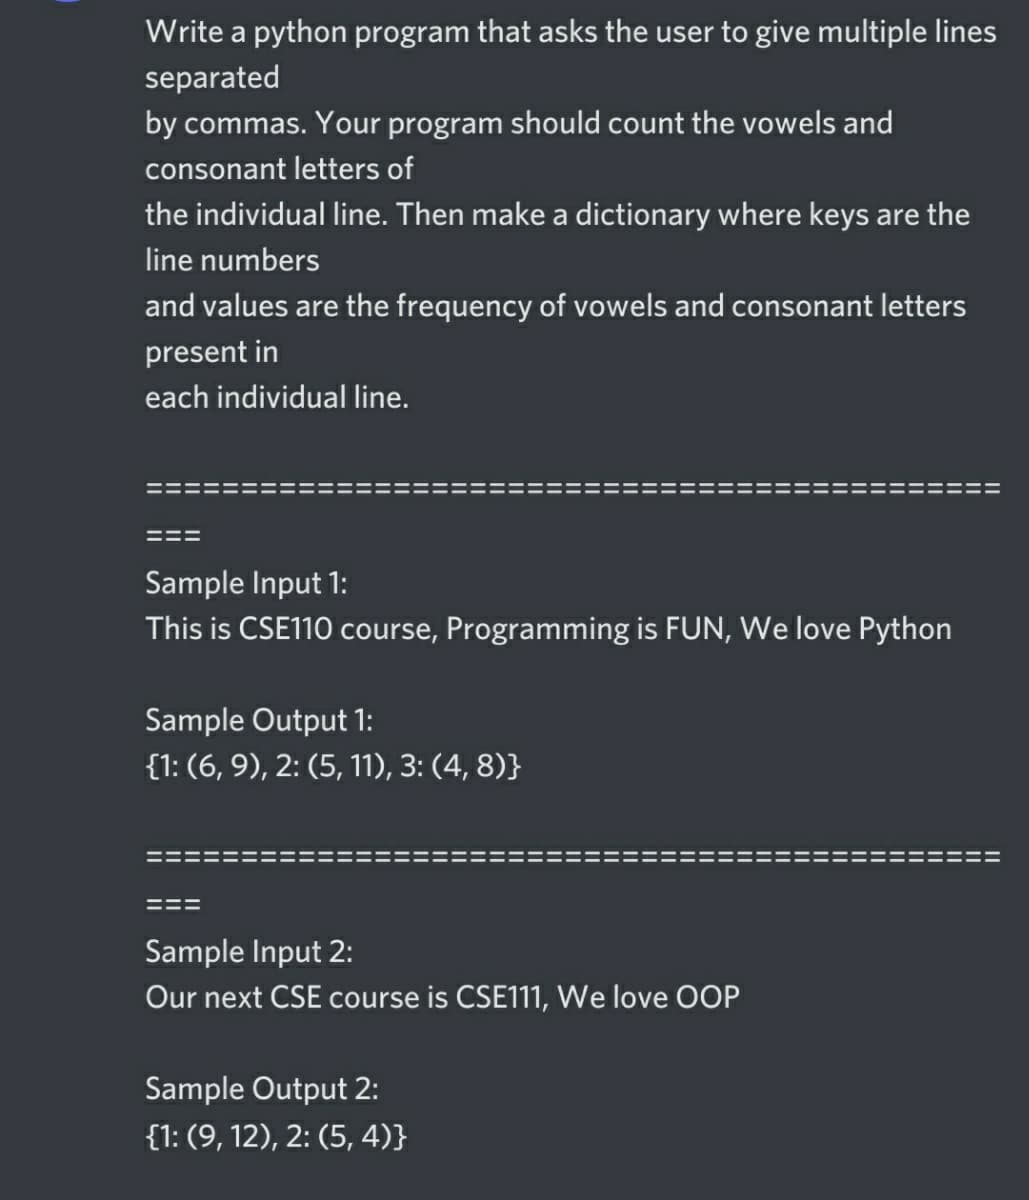 Write a python program that asks the user to give multiple lines
separated
by commas. Your program should count the vowels and
consonant letters of
the individual line. Then make a dictionary where keys are the
line numbers
and values are the frequency of vowels and consonant letters
present in
each individual line.
Sample Input 1:
This is CSE110 course, Programming is FUN, We love Python
Sample Output 1:
{1: (6, 9), 2: (5, 11), 3: (4, 8)}
Sample Input 2:
Our next CSE course is CSE111, We love OOP
Sample Output 2:
{1: (9, 12), 2: (5, 4)}
